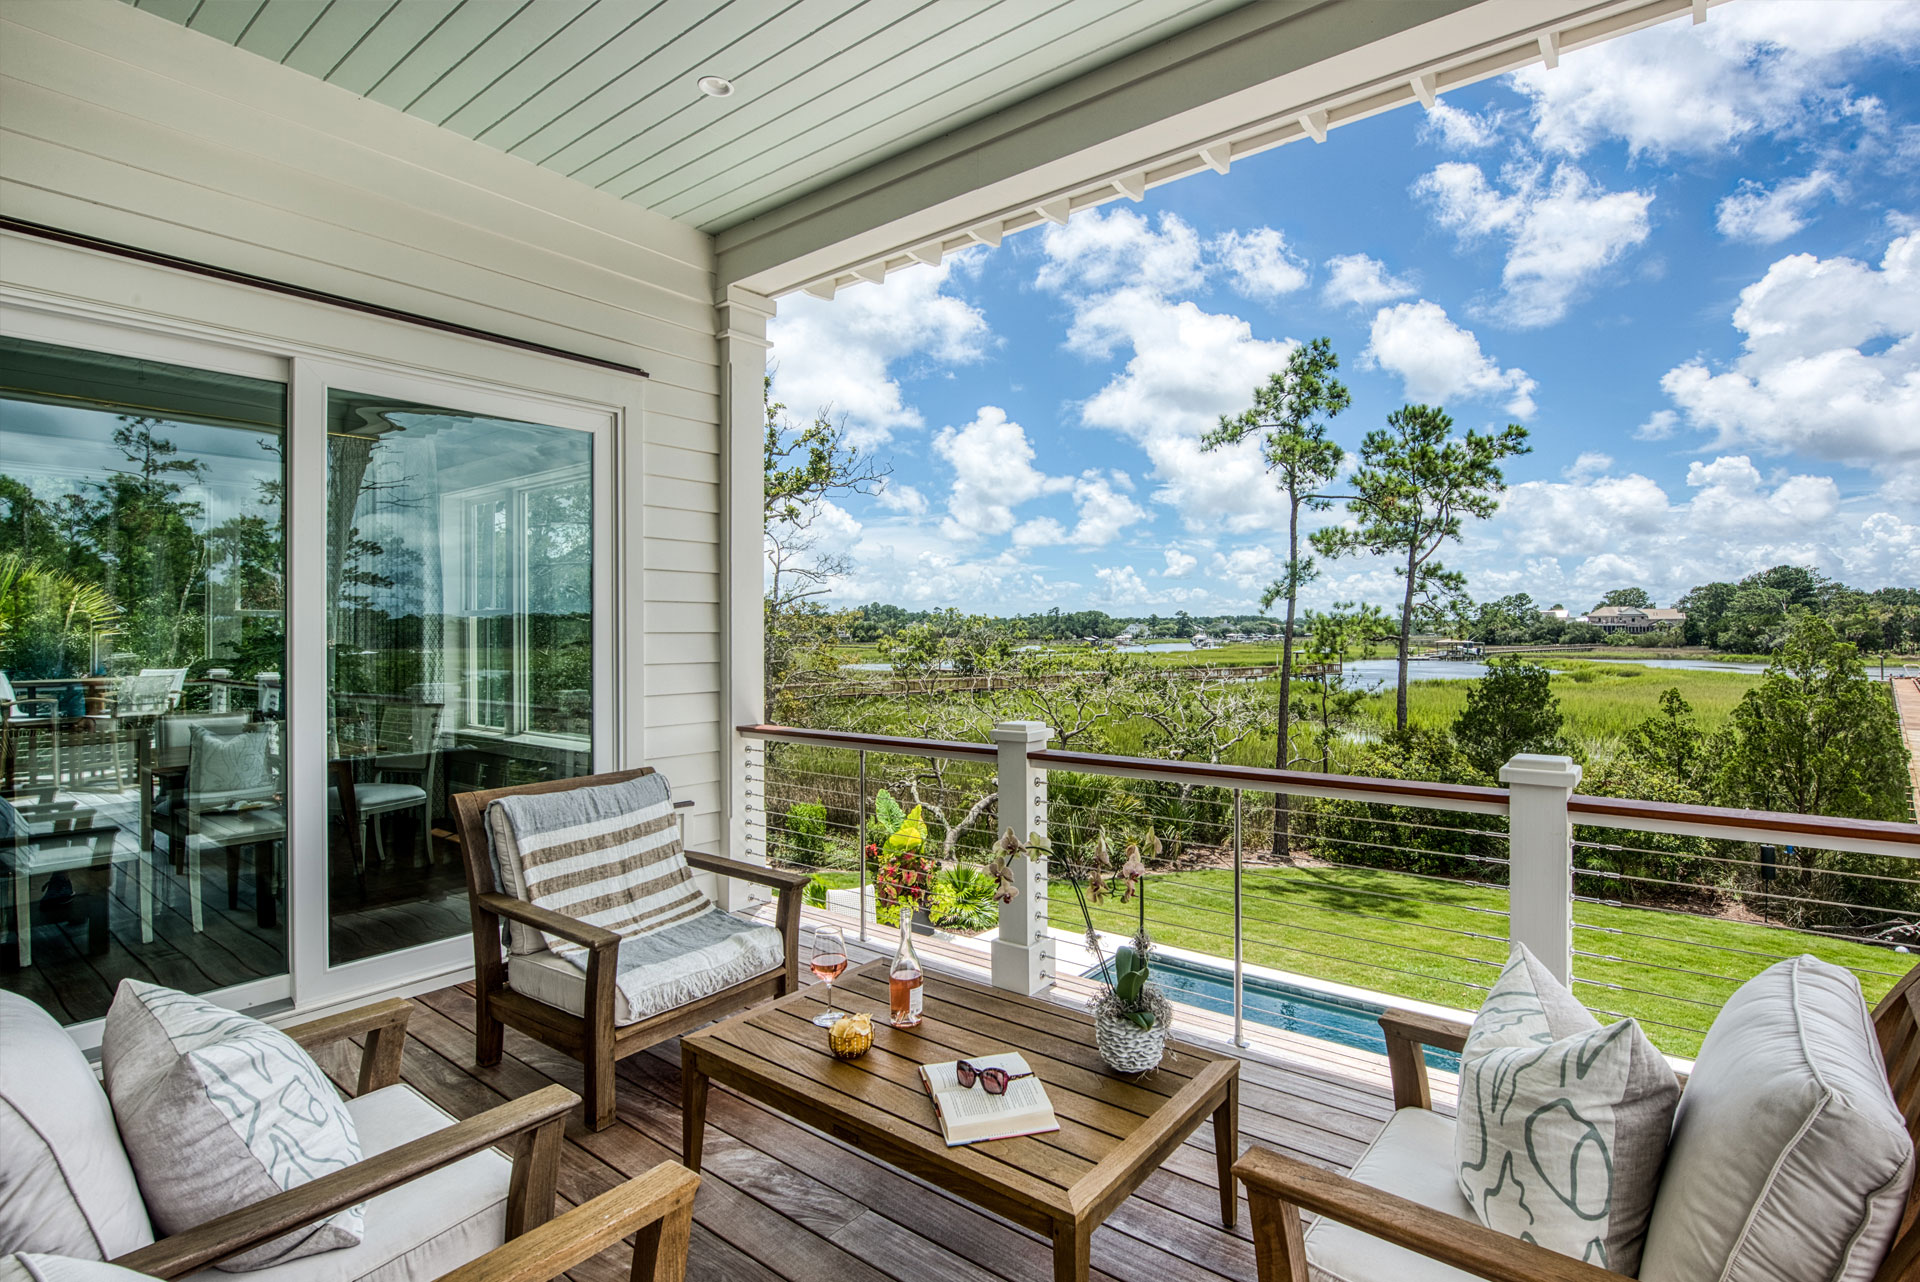 Take in the views from this rear-facing, covered porch